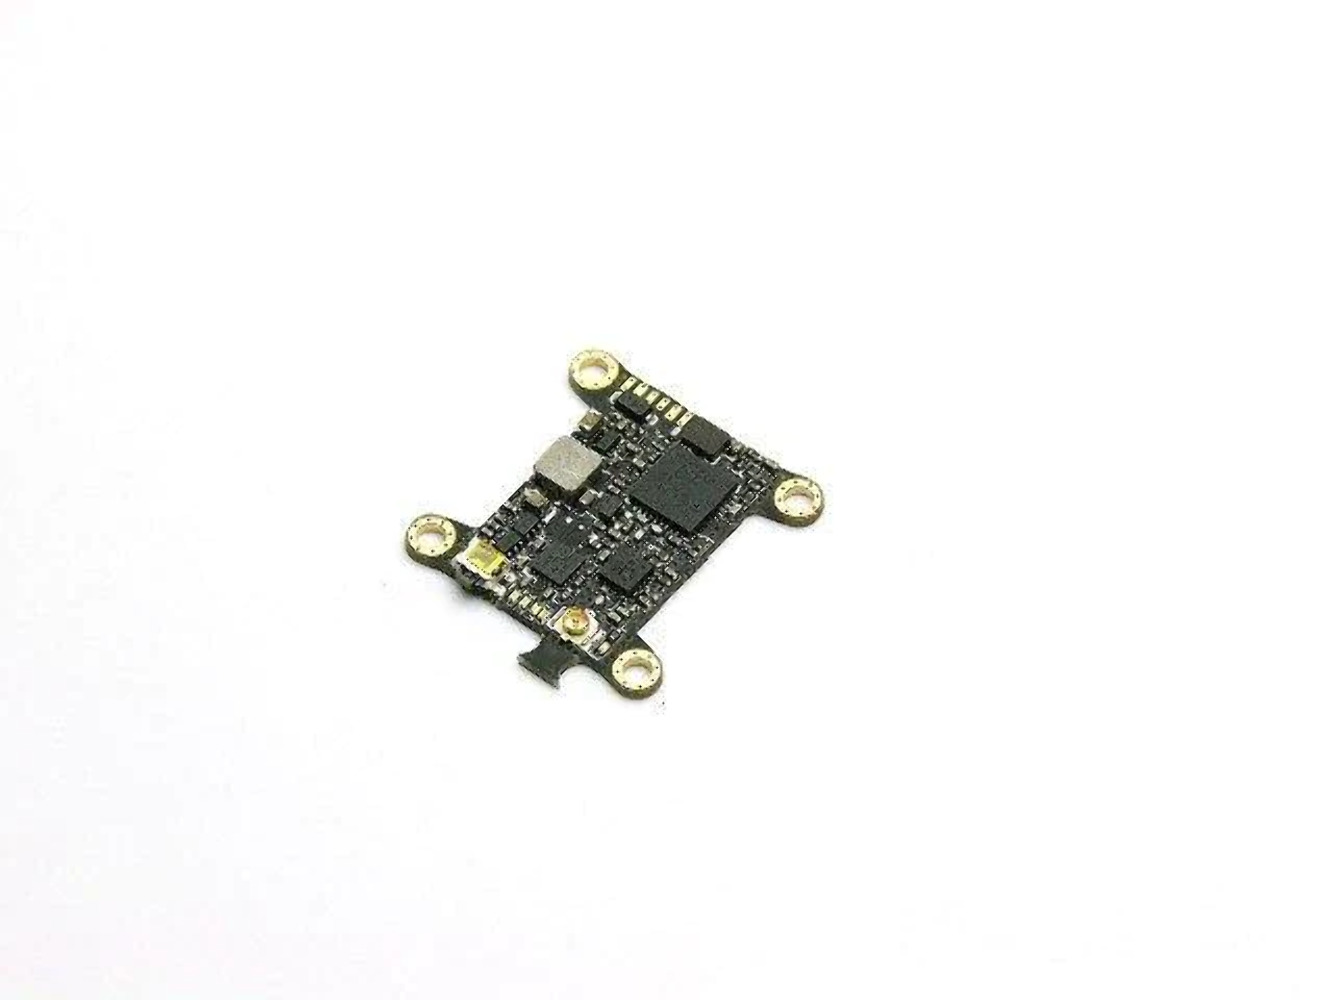 Mini FPV Transmitter for Drone Racing